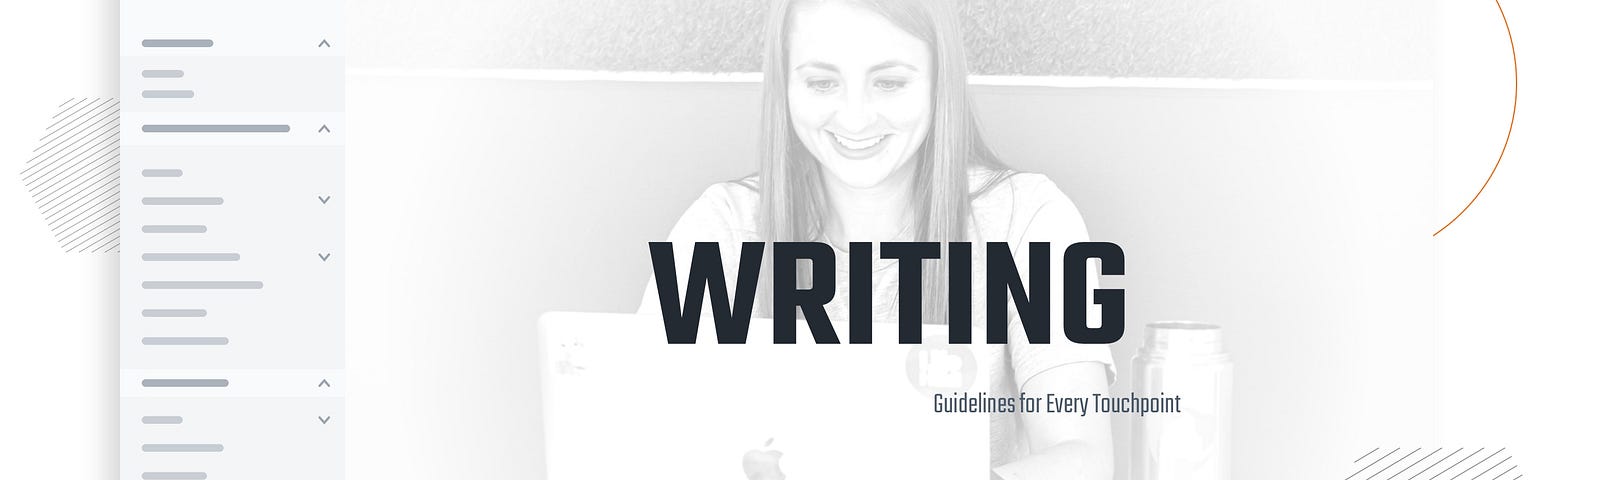 Writing guidelines for every touchpoint